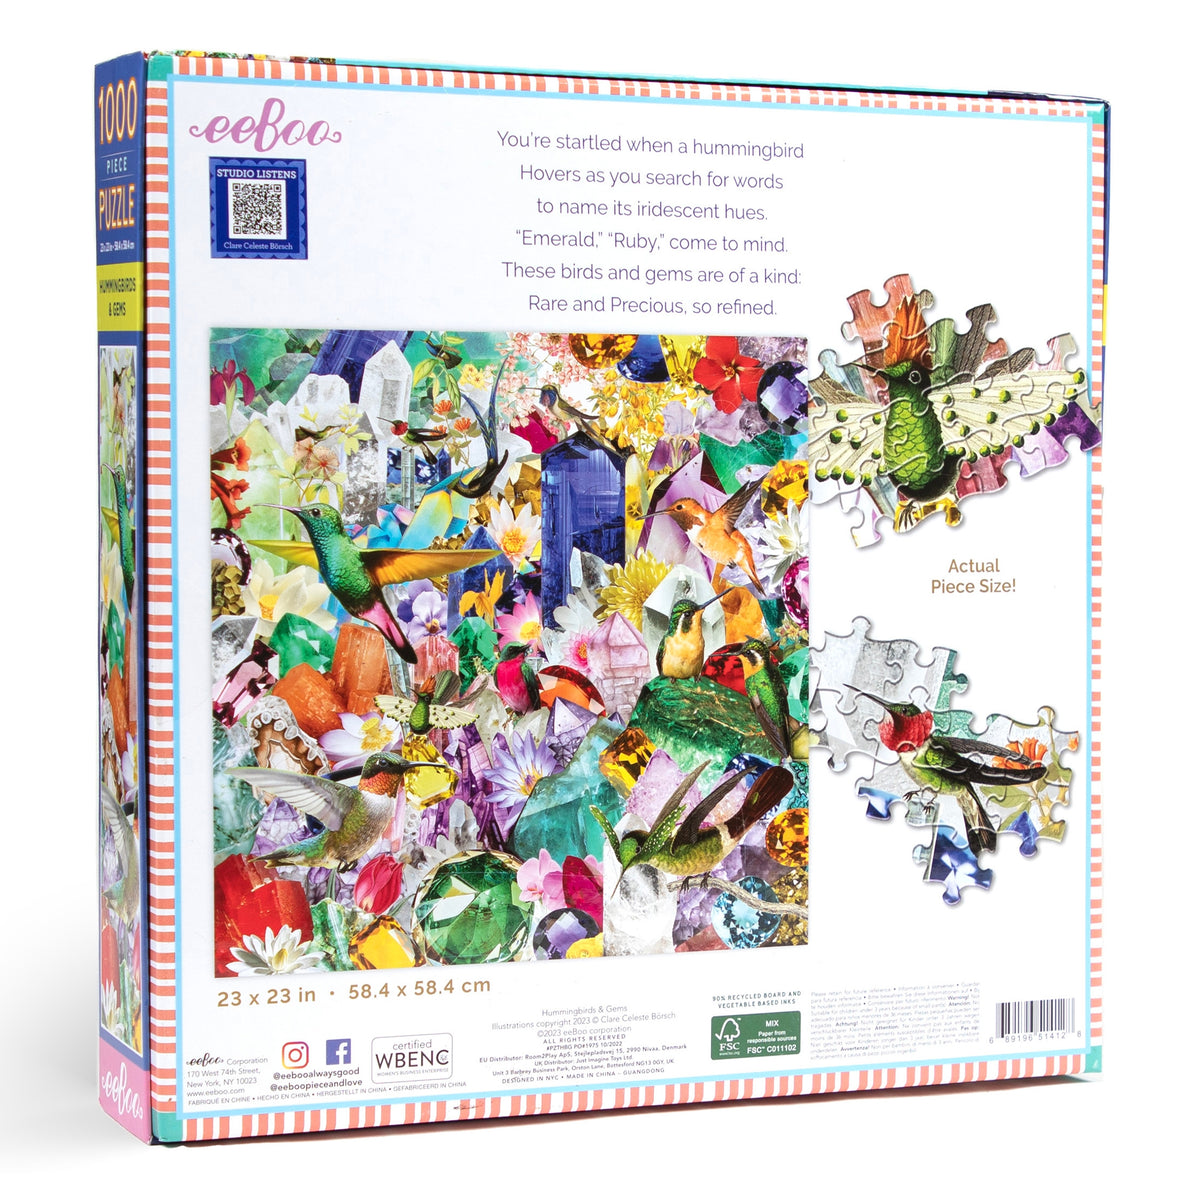 Hummingbirds and Gems 1000pc Puzzle - Heart of the Home LV